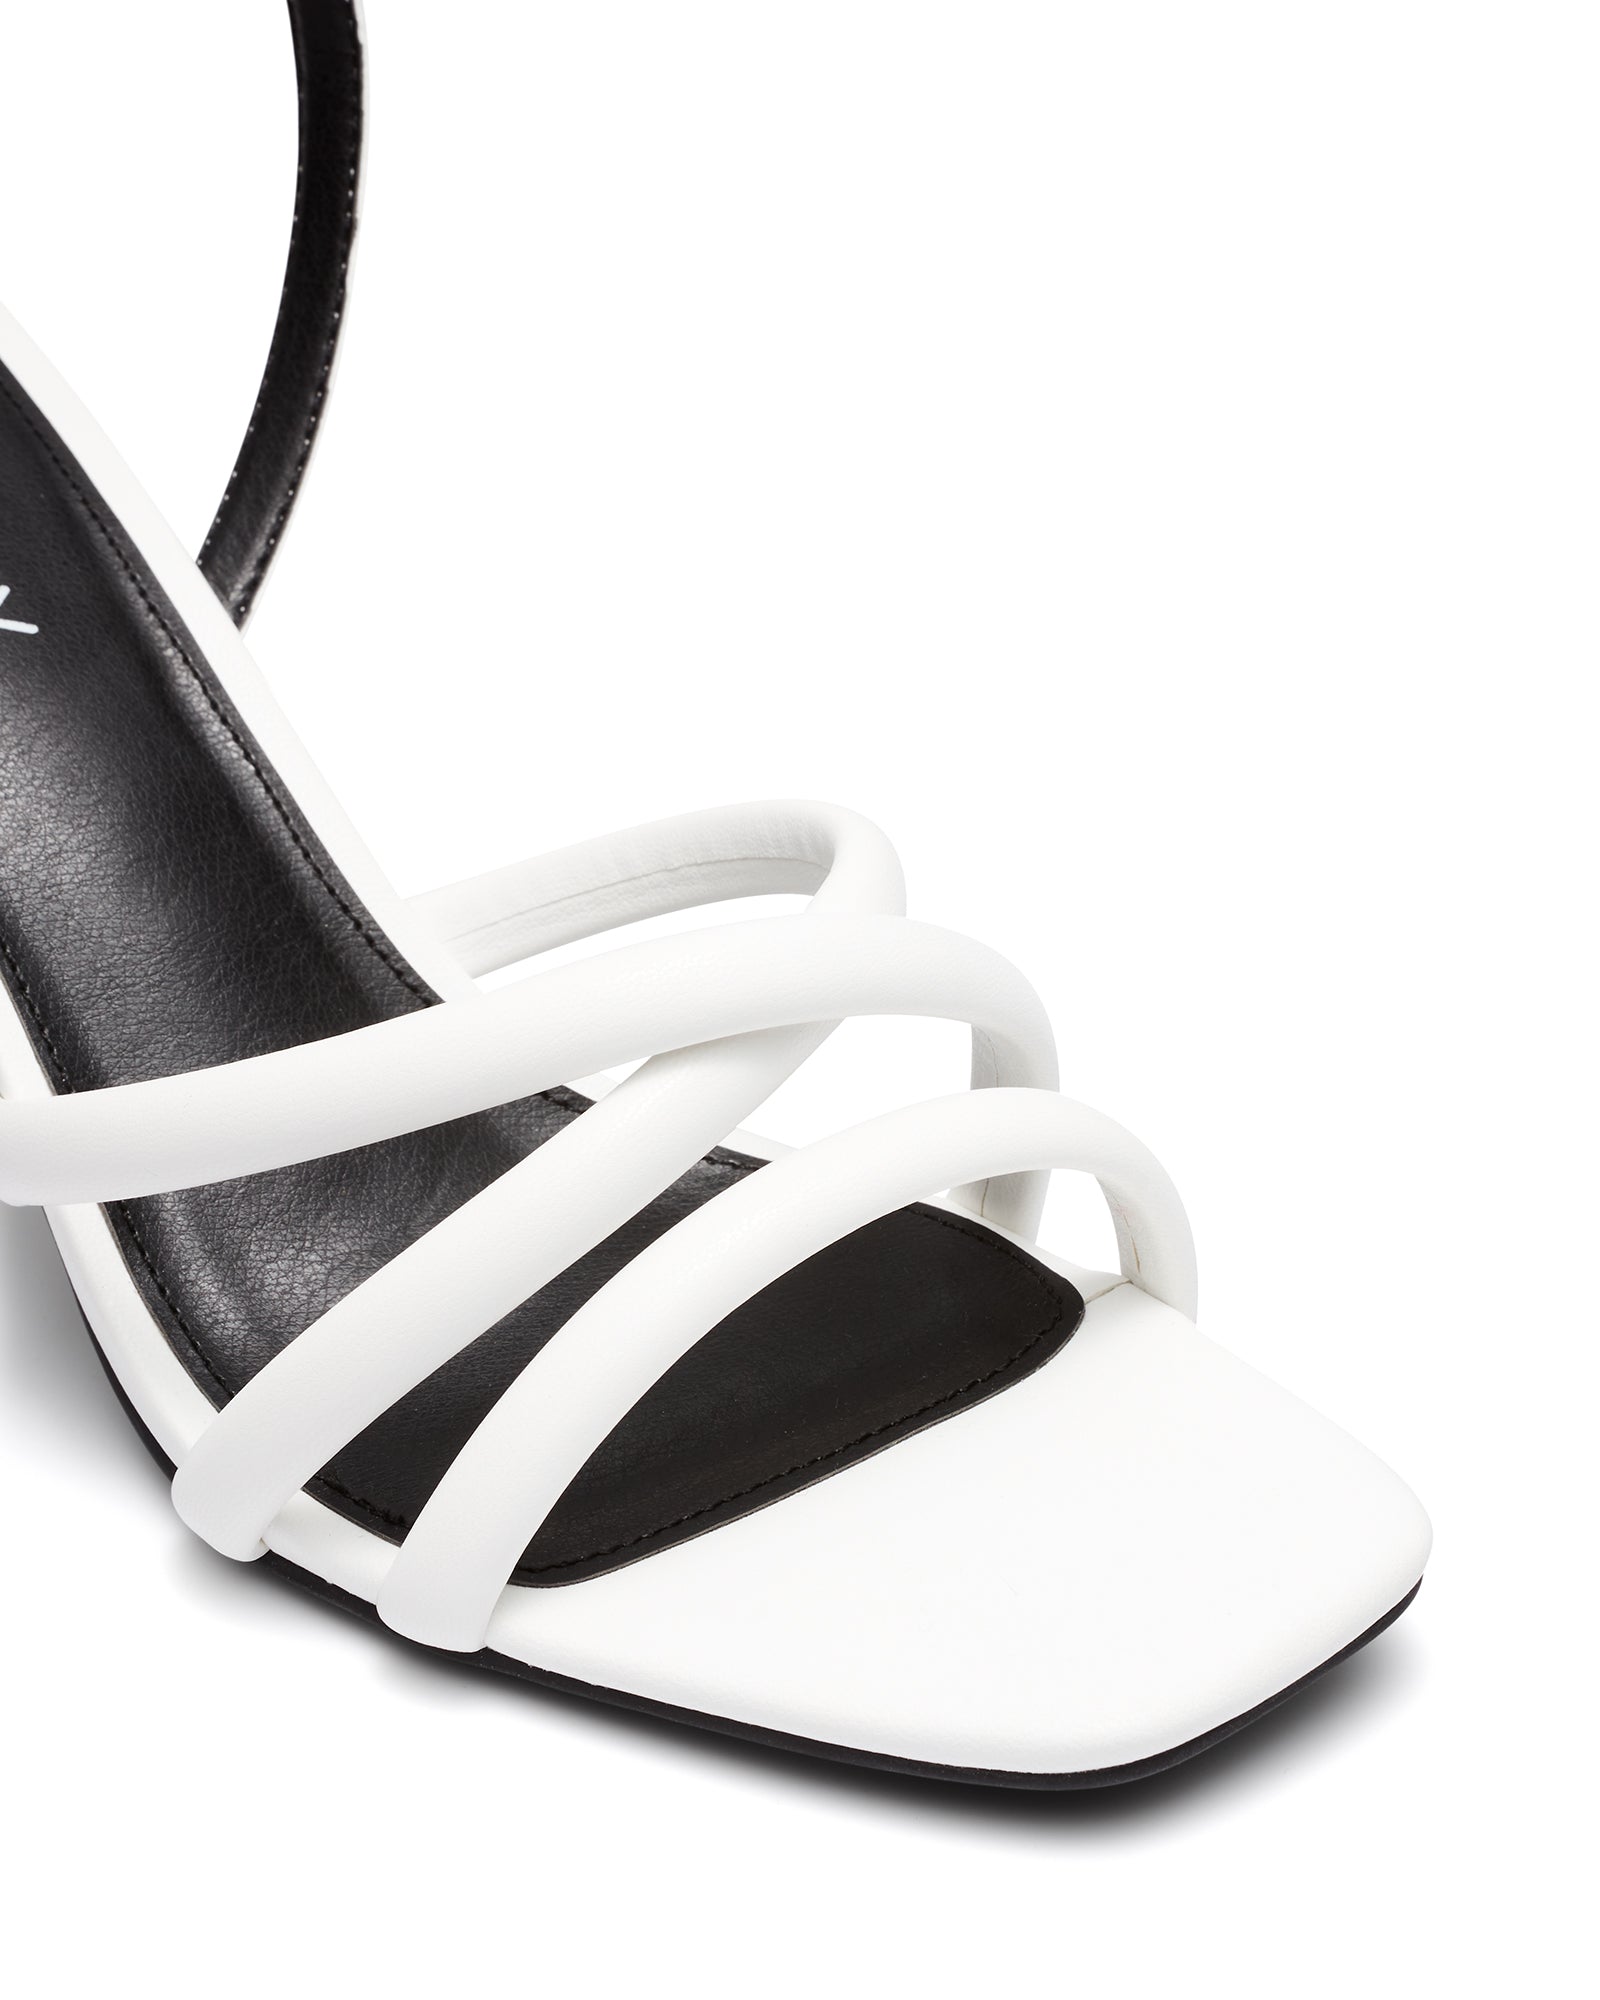 Therapy Shoes Kade White | Women's Heels | Sandals | Strappy | Dress